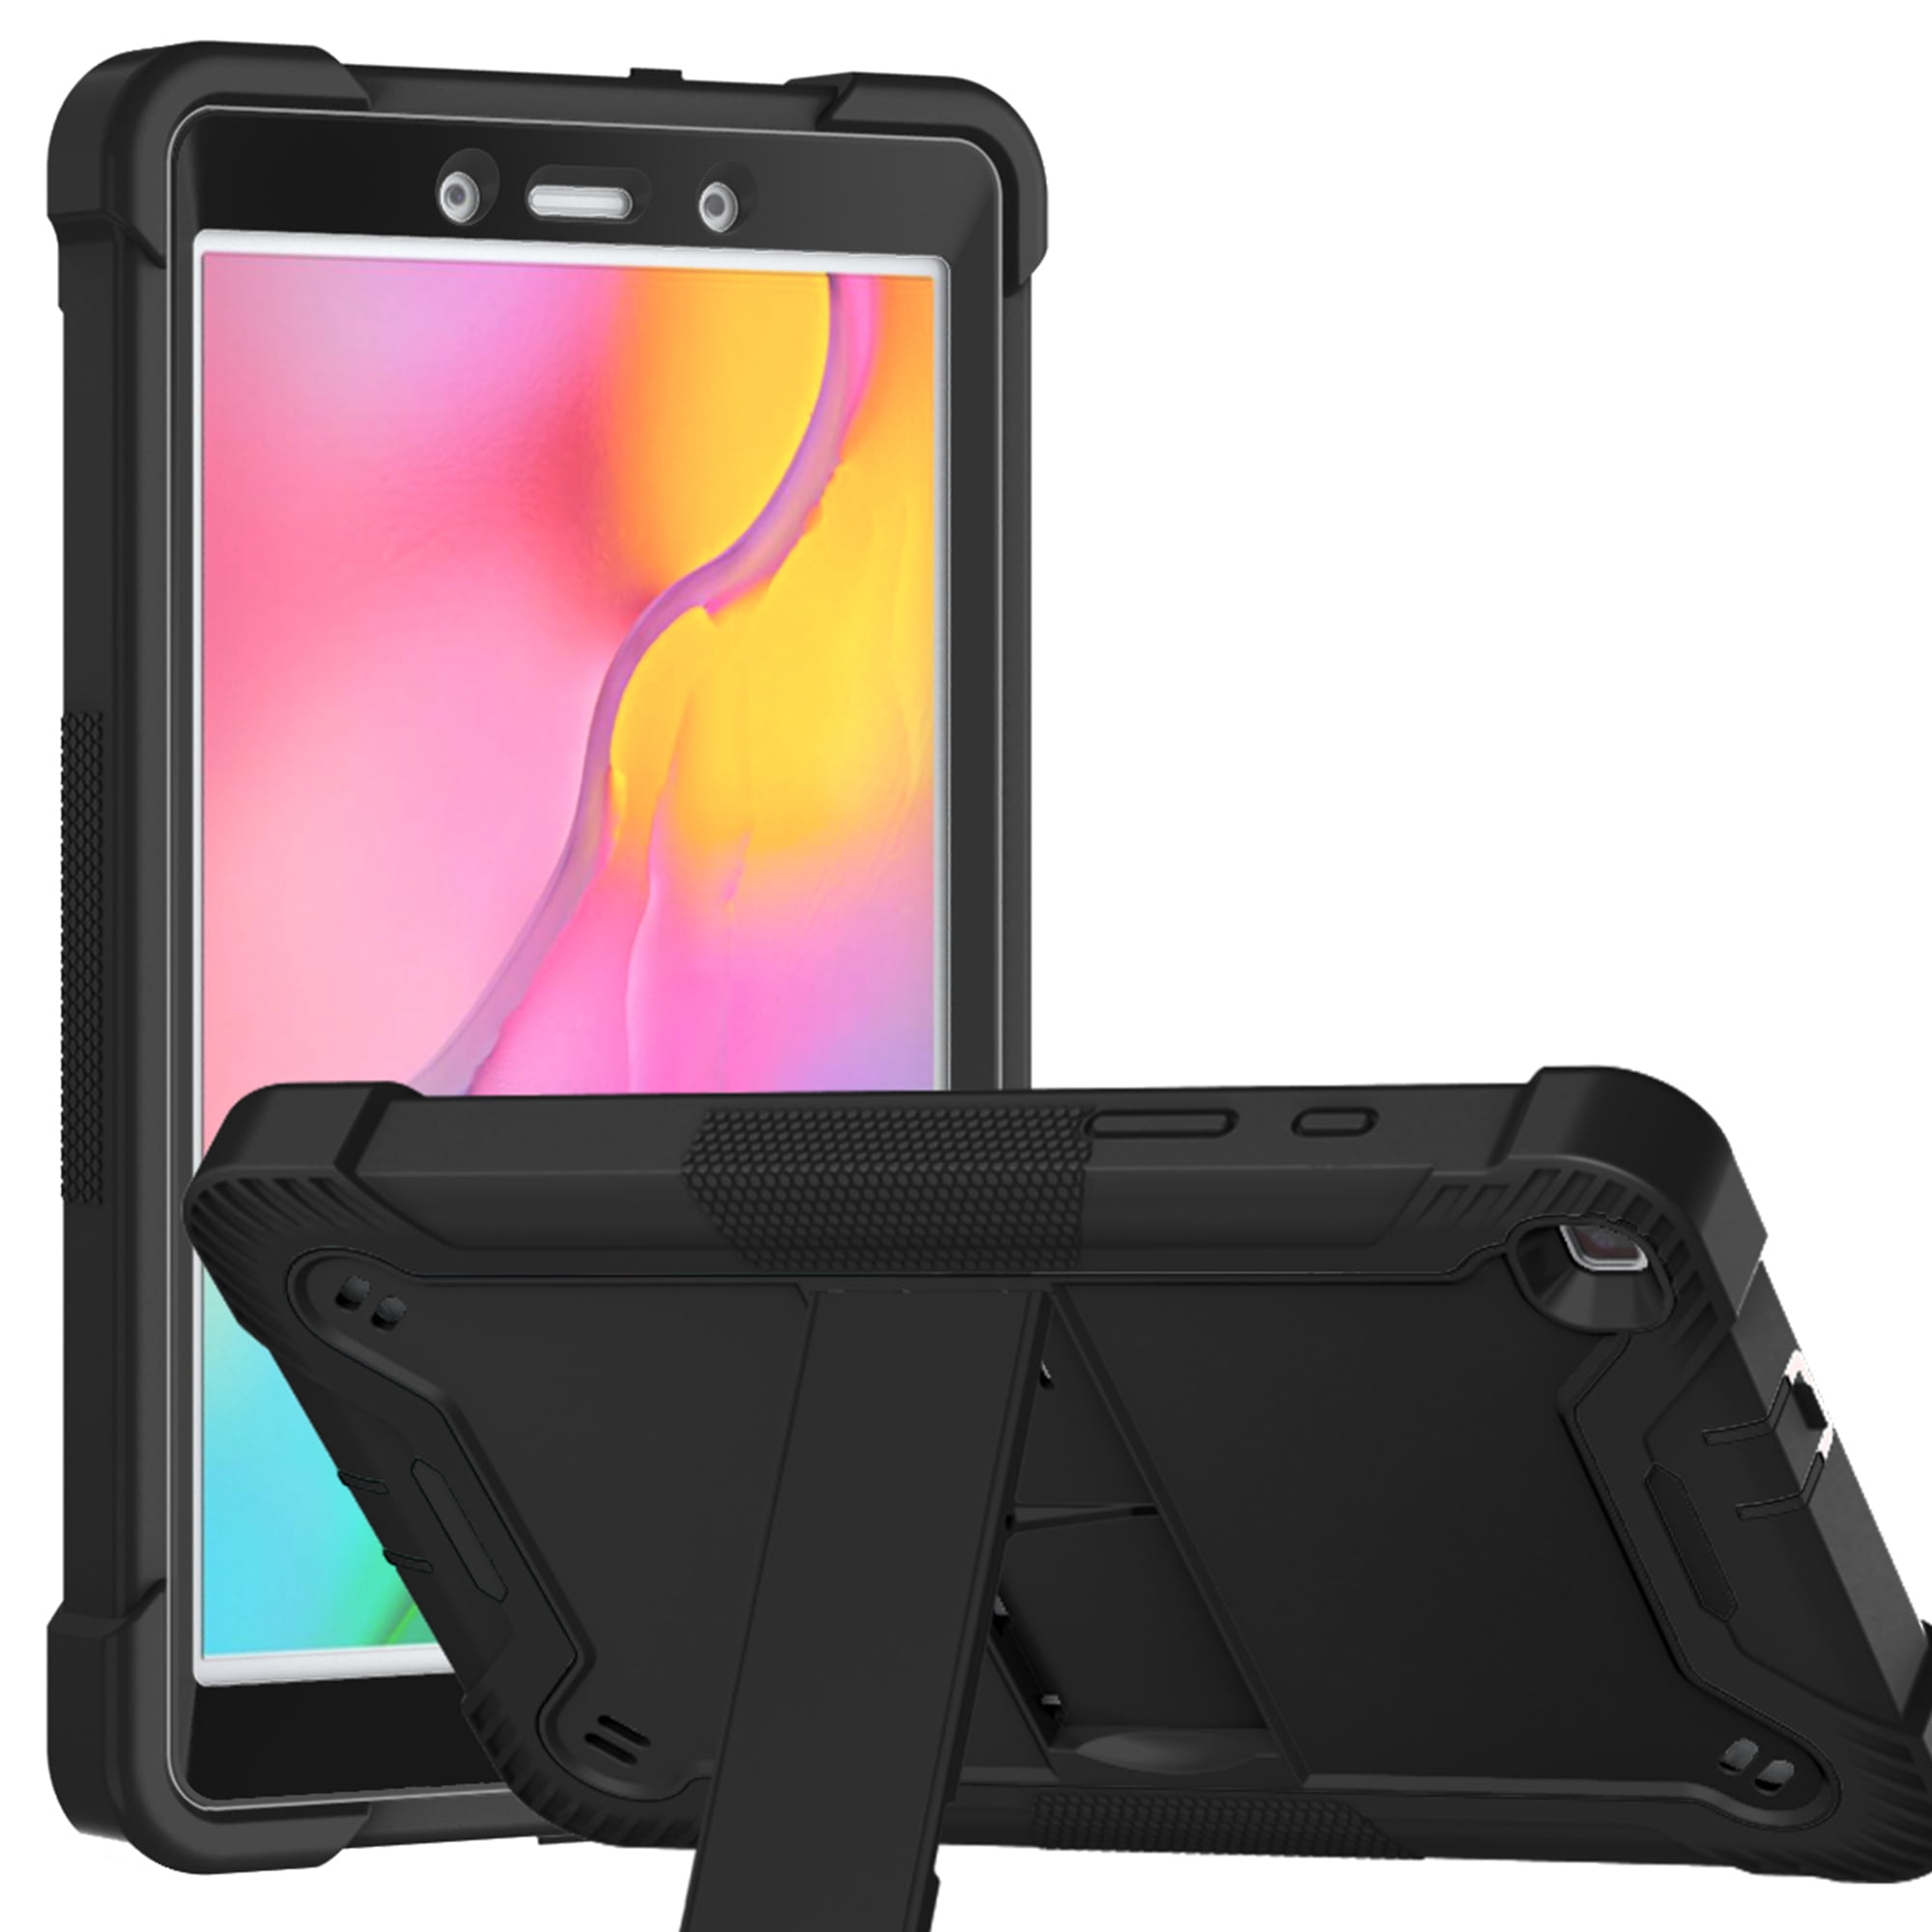 Dteck Case for Samsung Galaxy Tab A 8inch SMT290 T295 (2019 Released),3Layers Multi